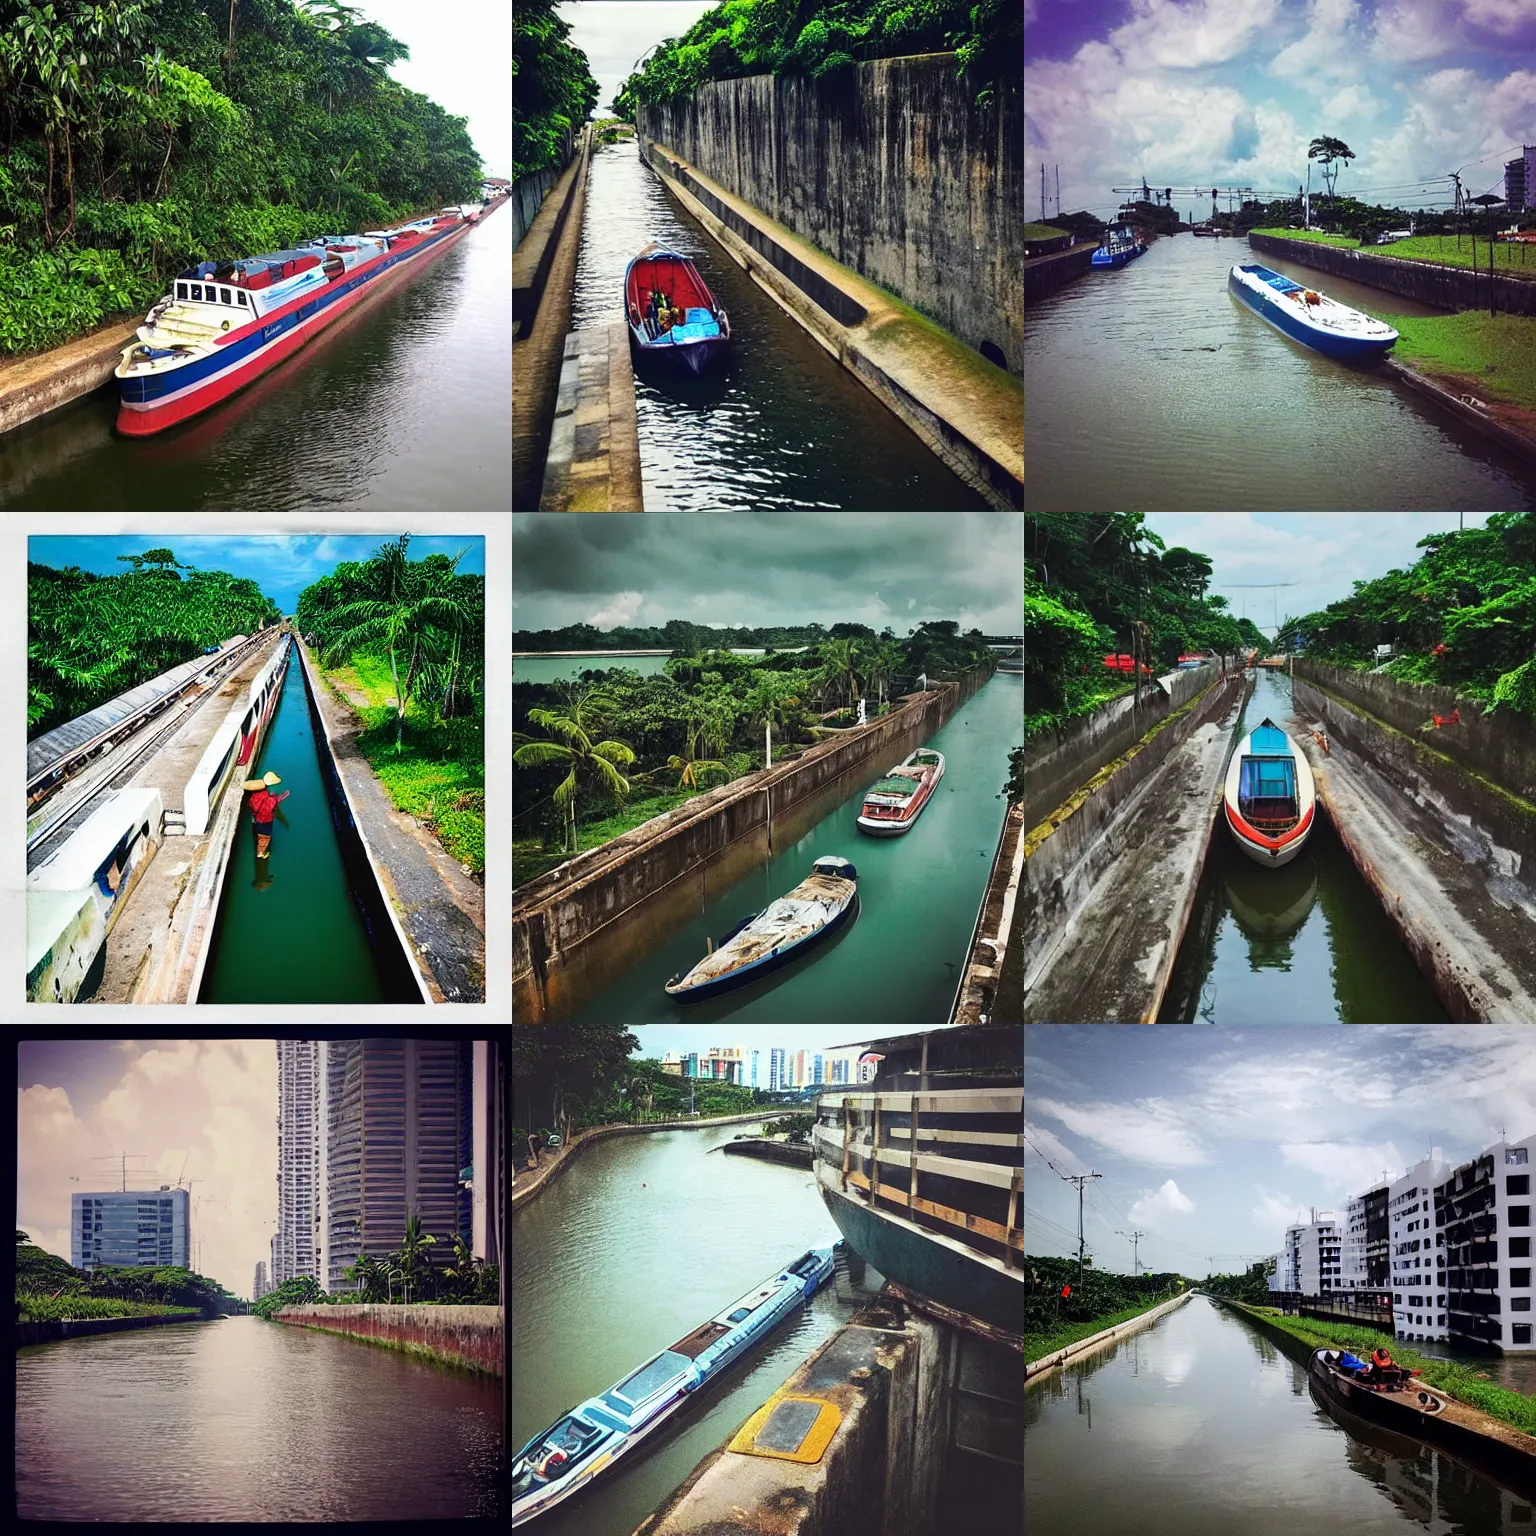 Prompt: “A man, a plan, a canal, Panama”